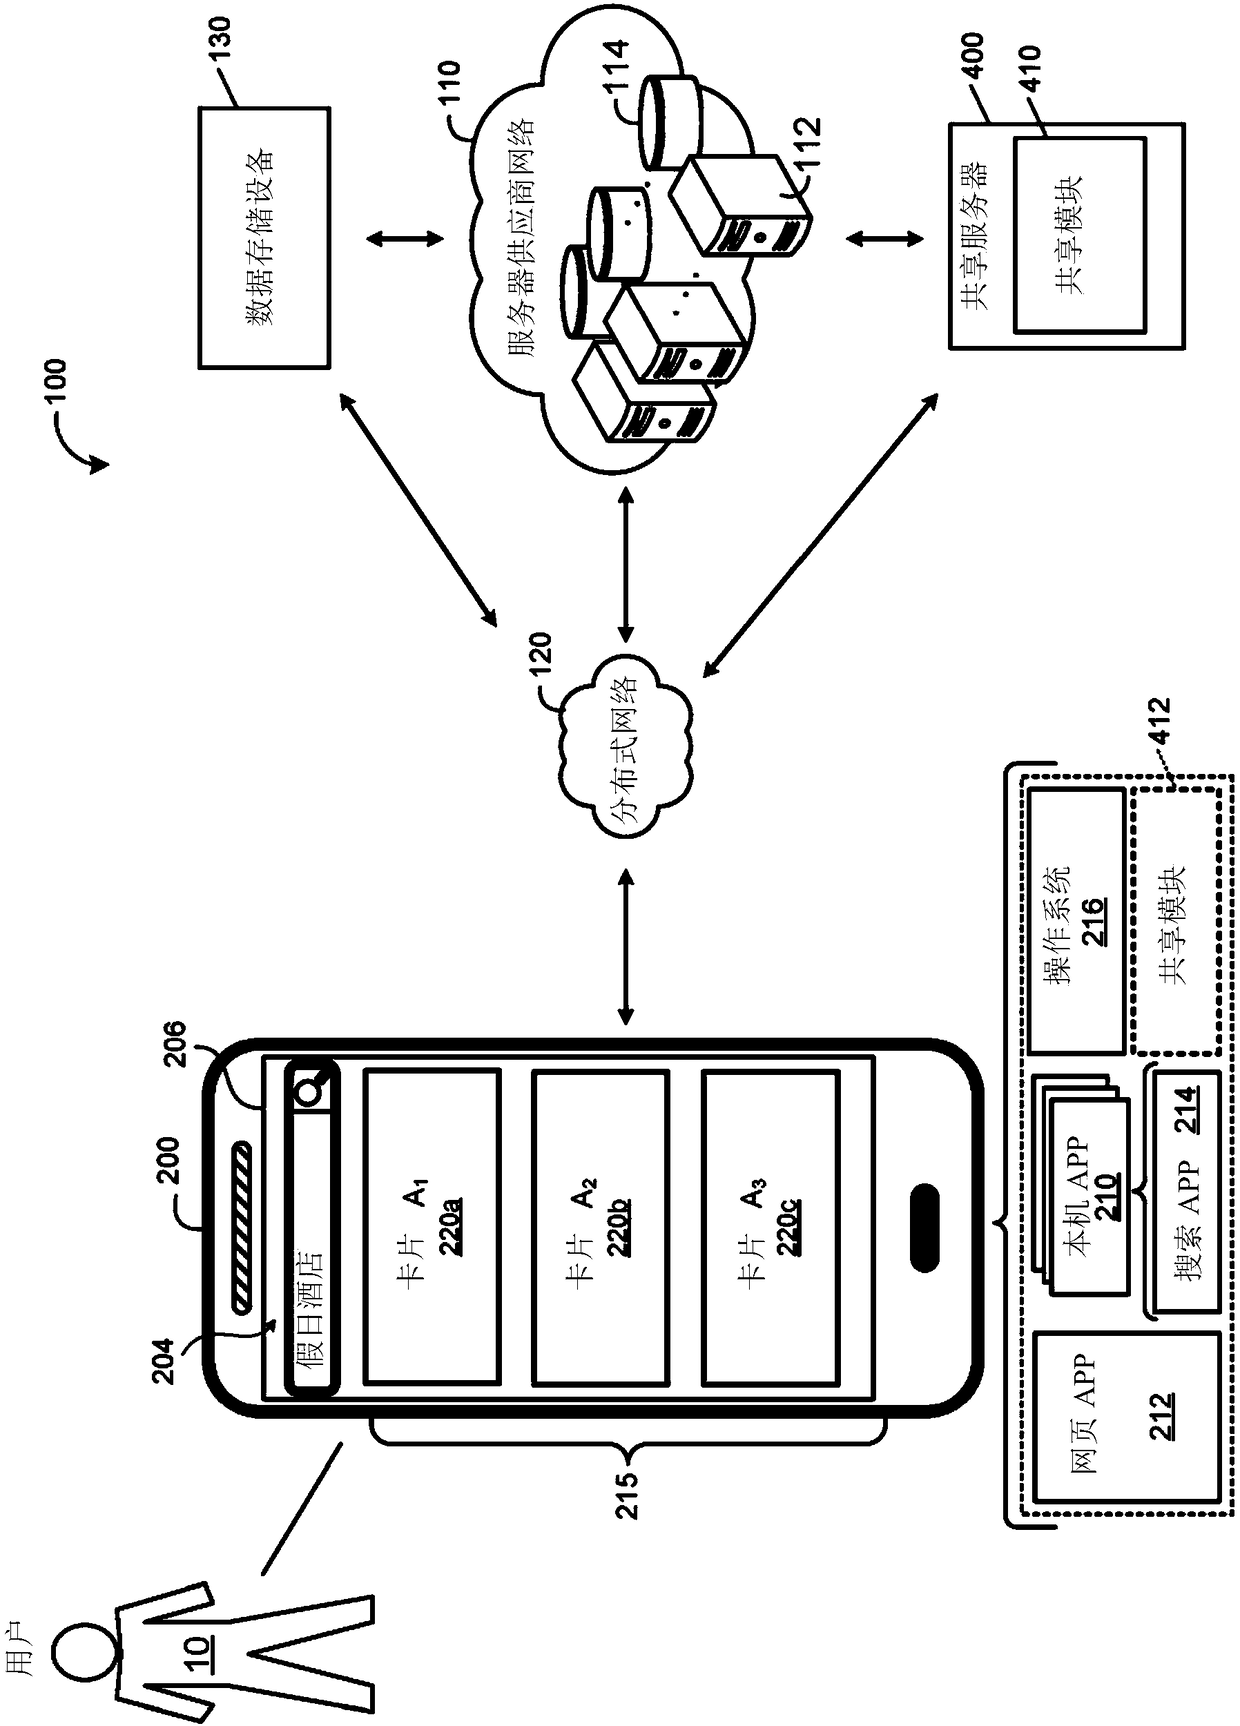 Message based application state and card sharing methods for user devices